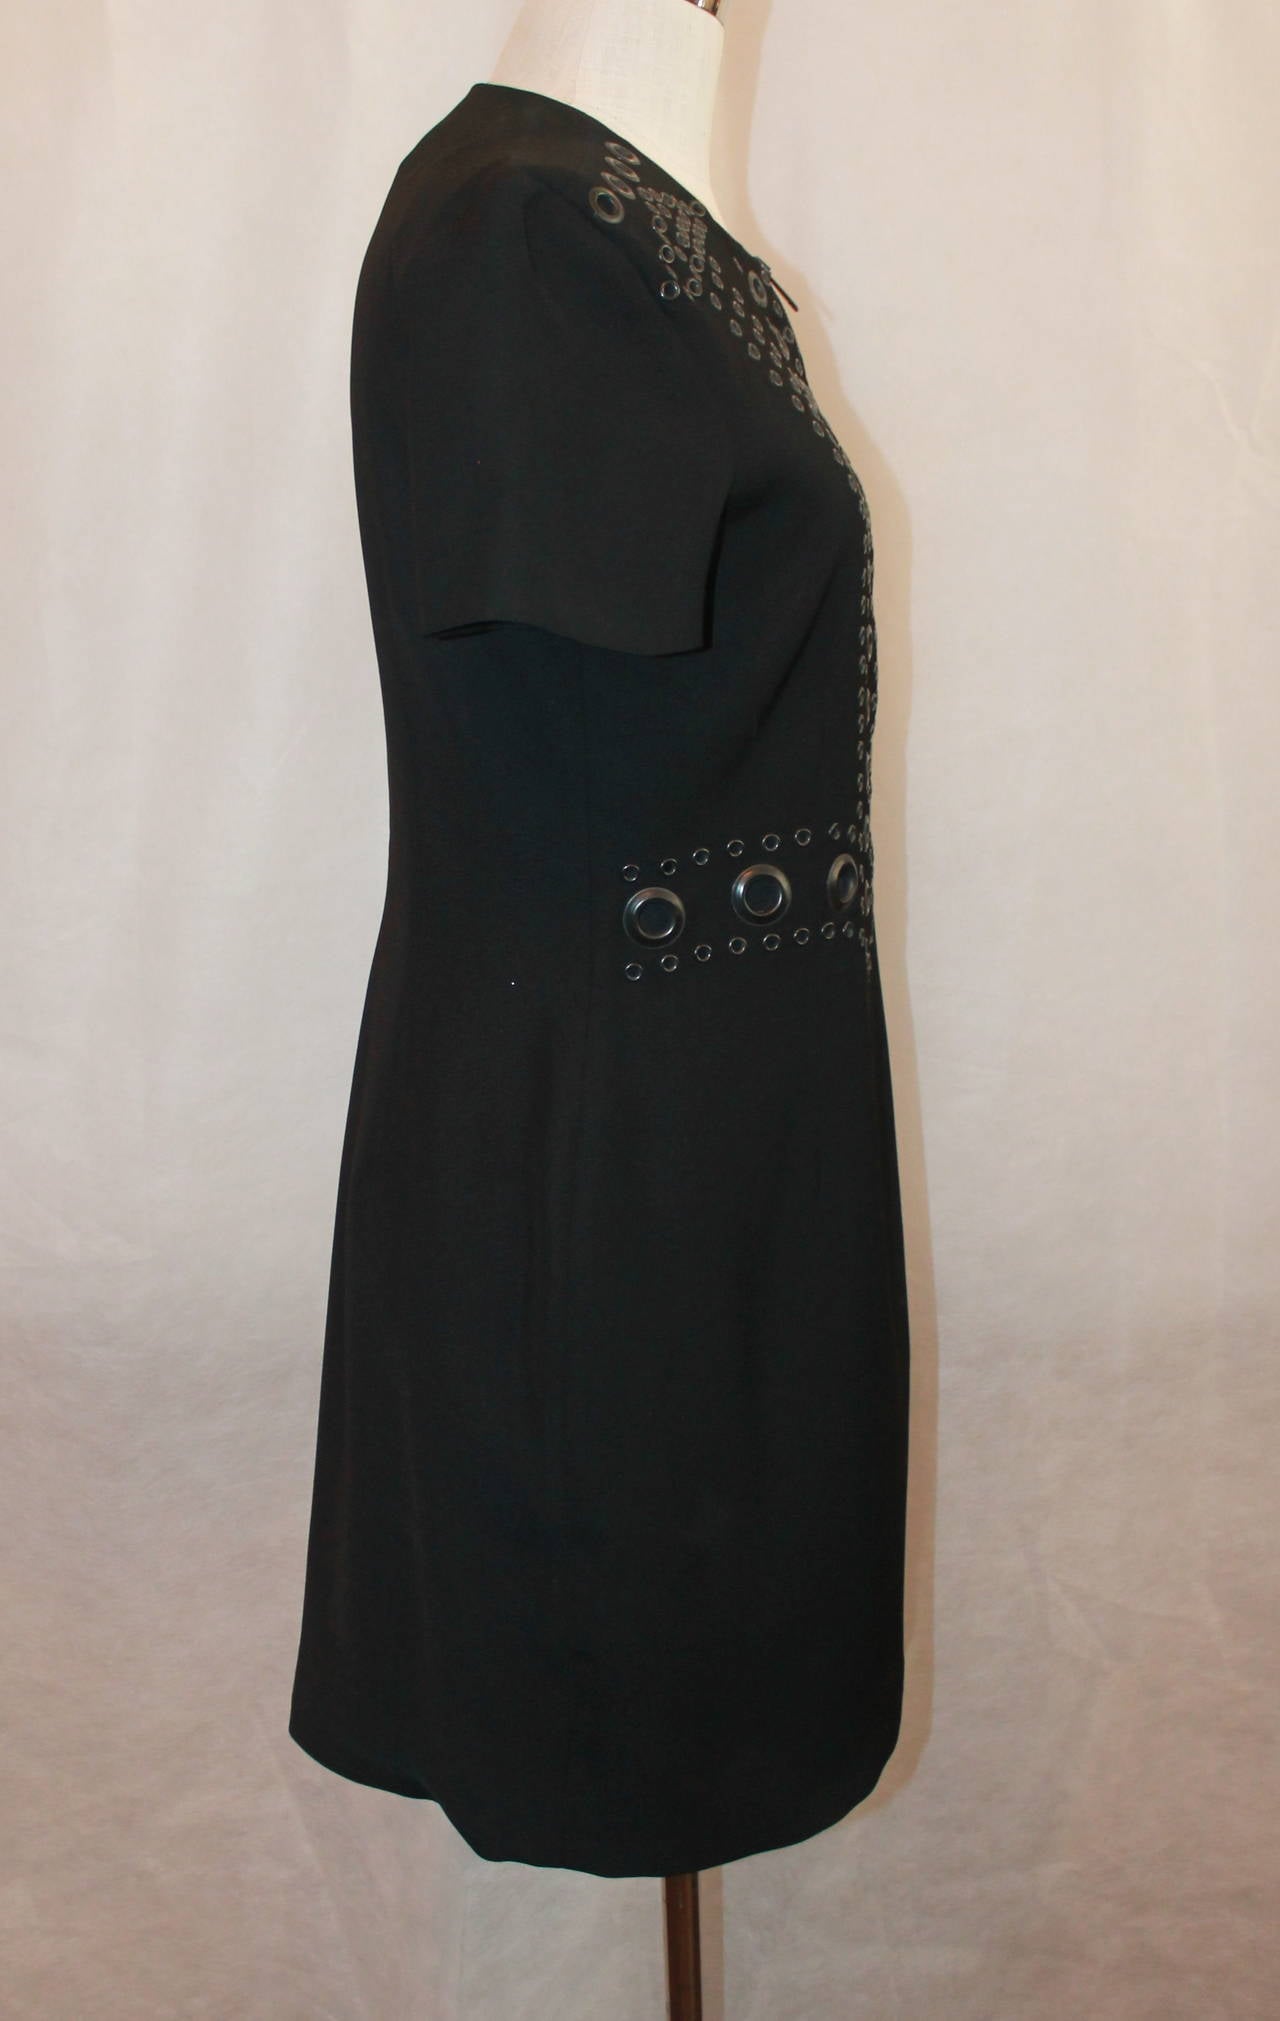 Givenchy Black Tapered Metal Eyelet Dress - 44 In Excellent Condition For Sale In West Palm Beach, FL